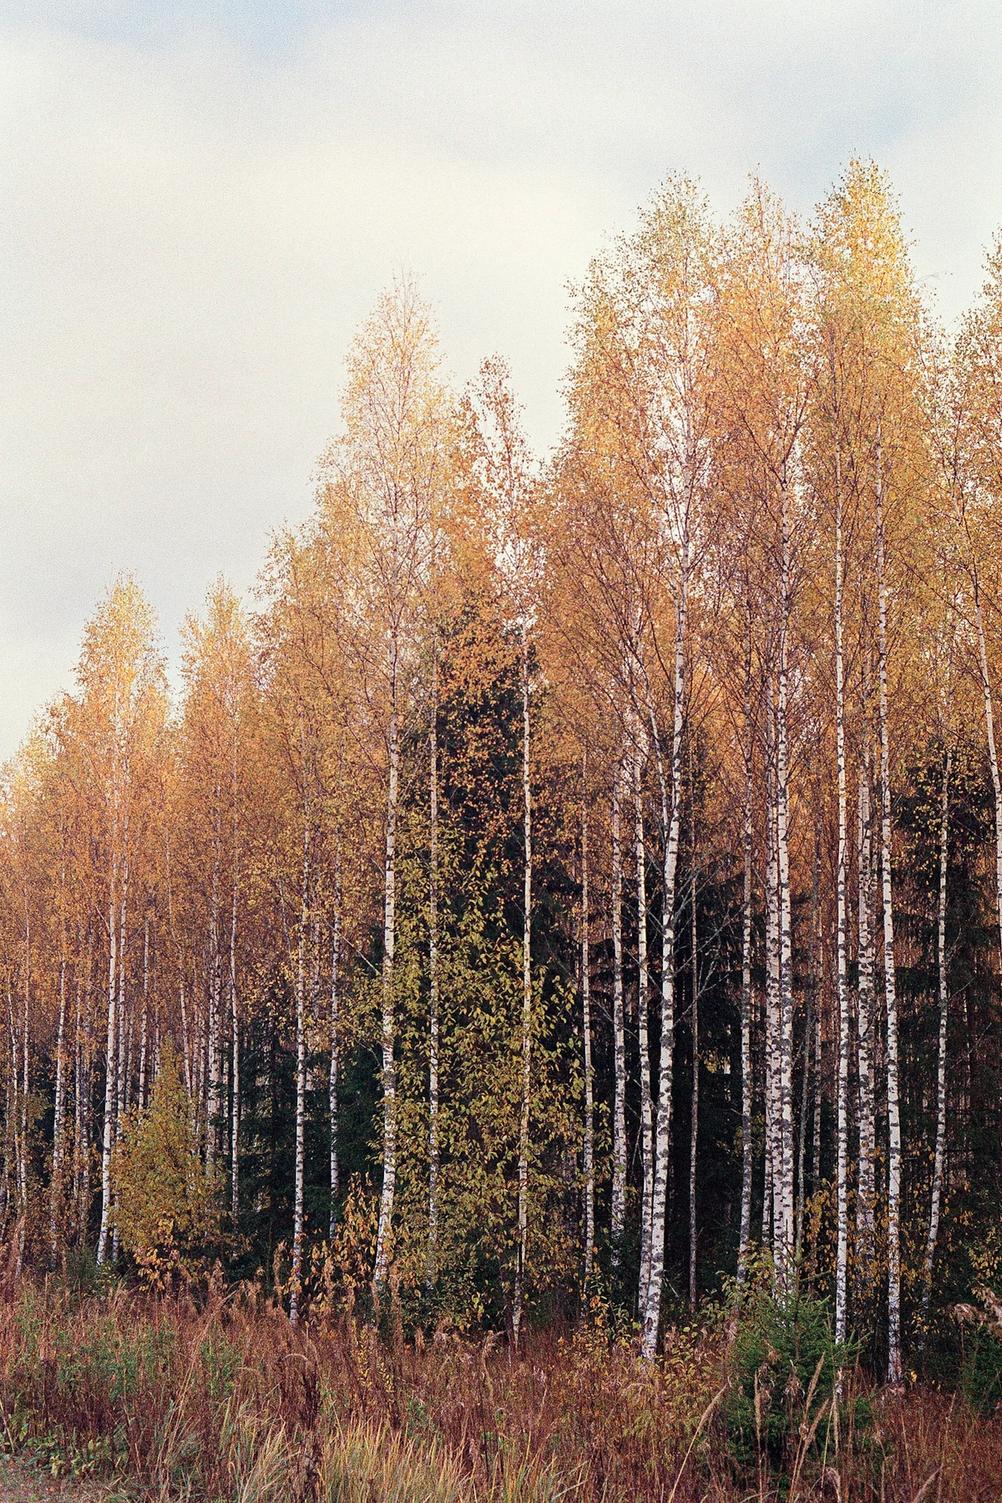 Photo of birches showing autumn colors.